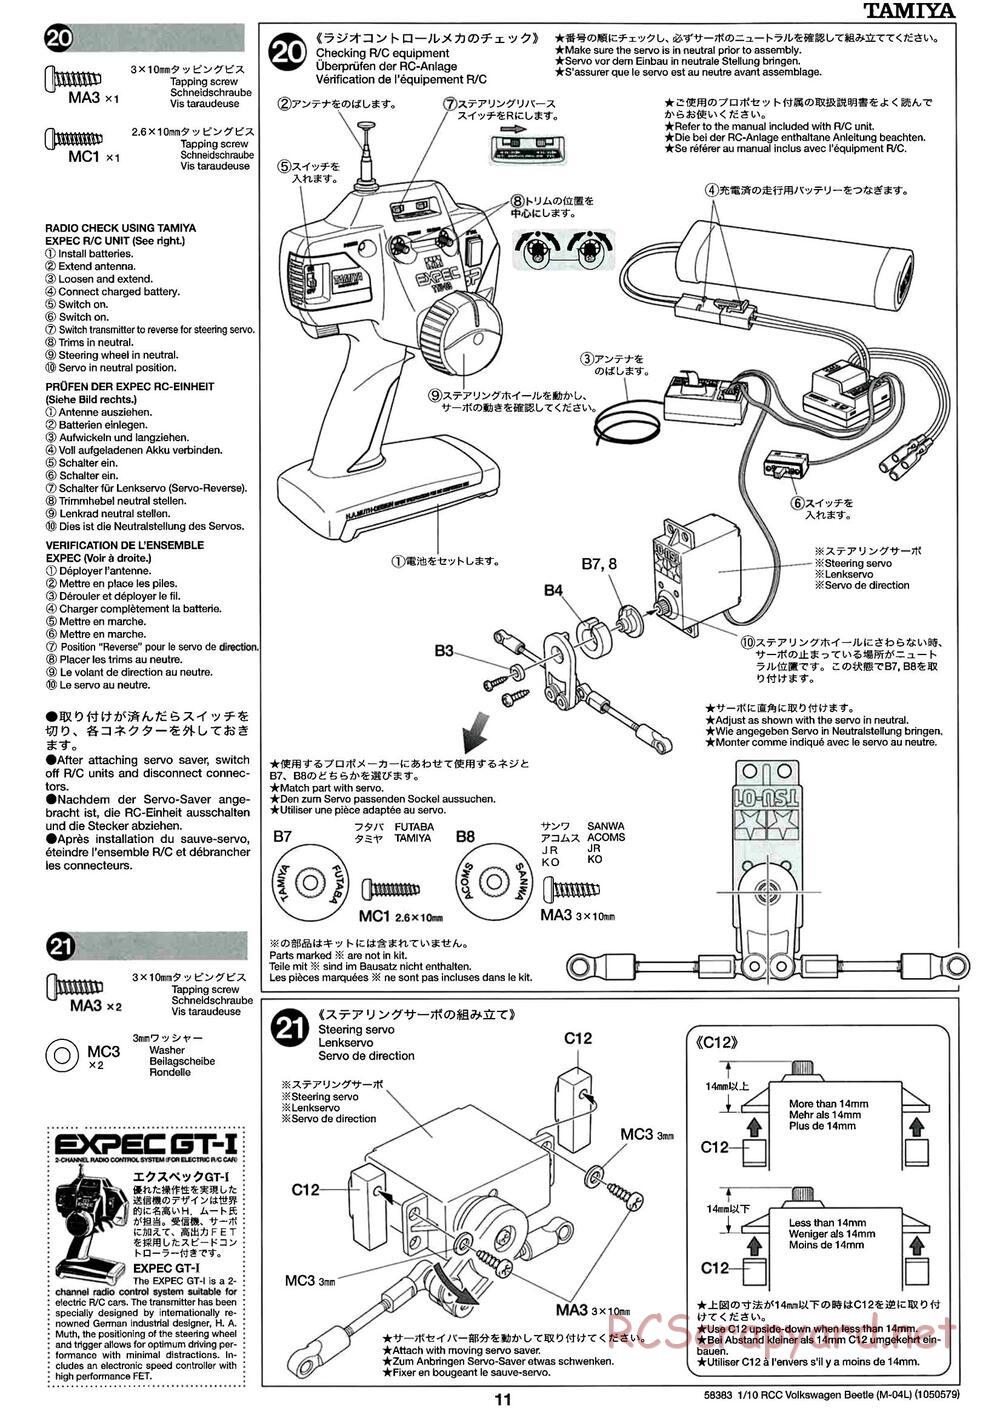 Tamiya - Volkswagen Beetle - M04L Chassis - Manual - Page 11